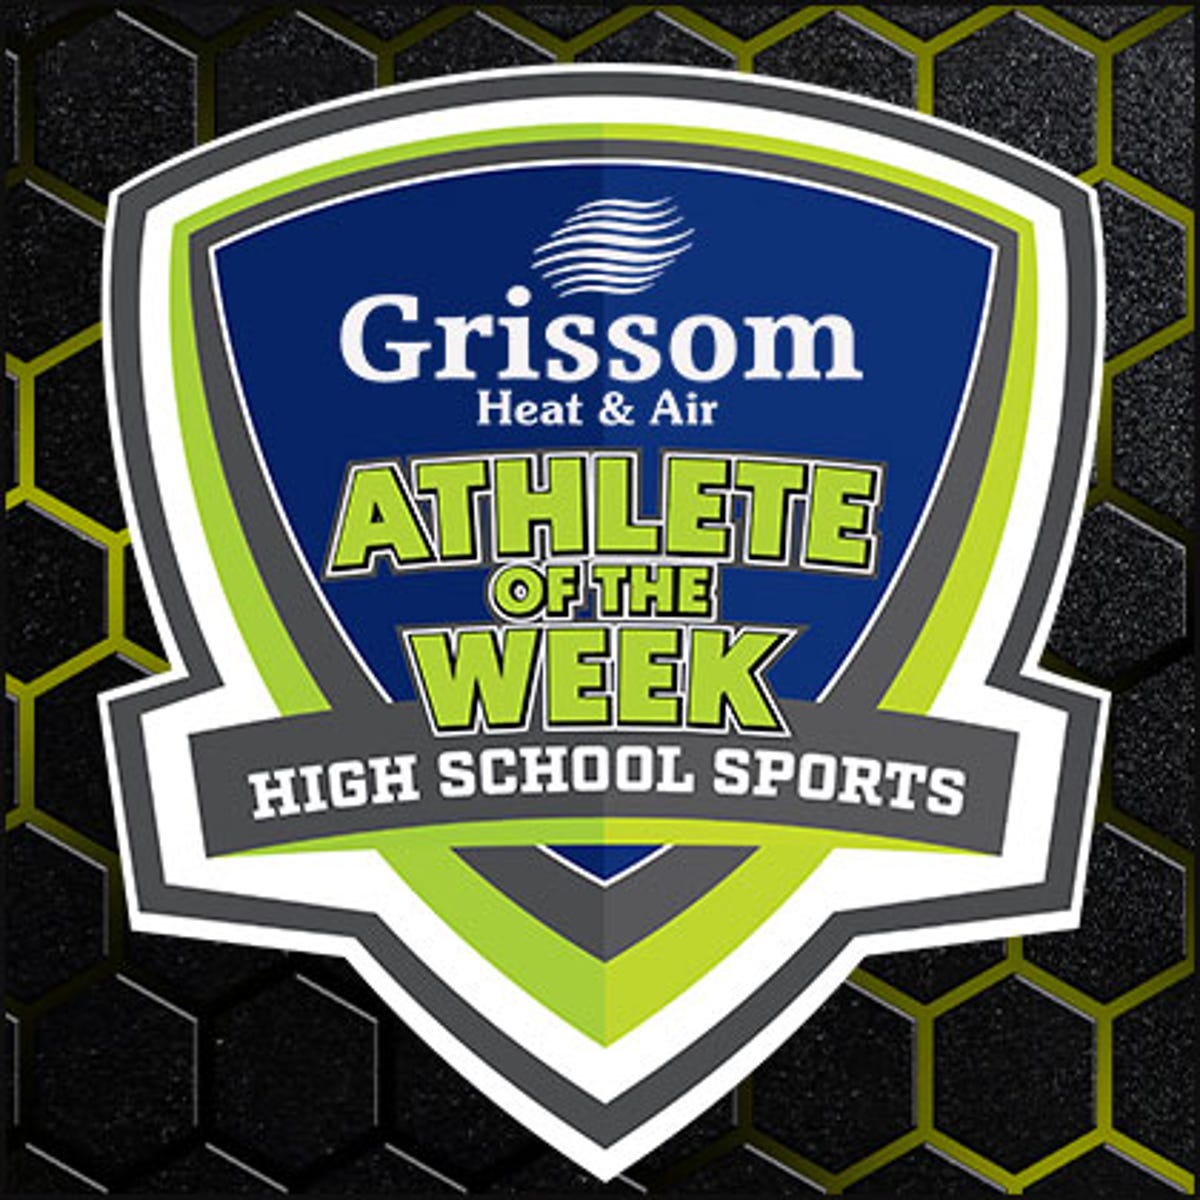 20-strikeout game: Vote for the Grissom Heat and Air Knoxville area girls athlete of the week for April 28 to May 4